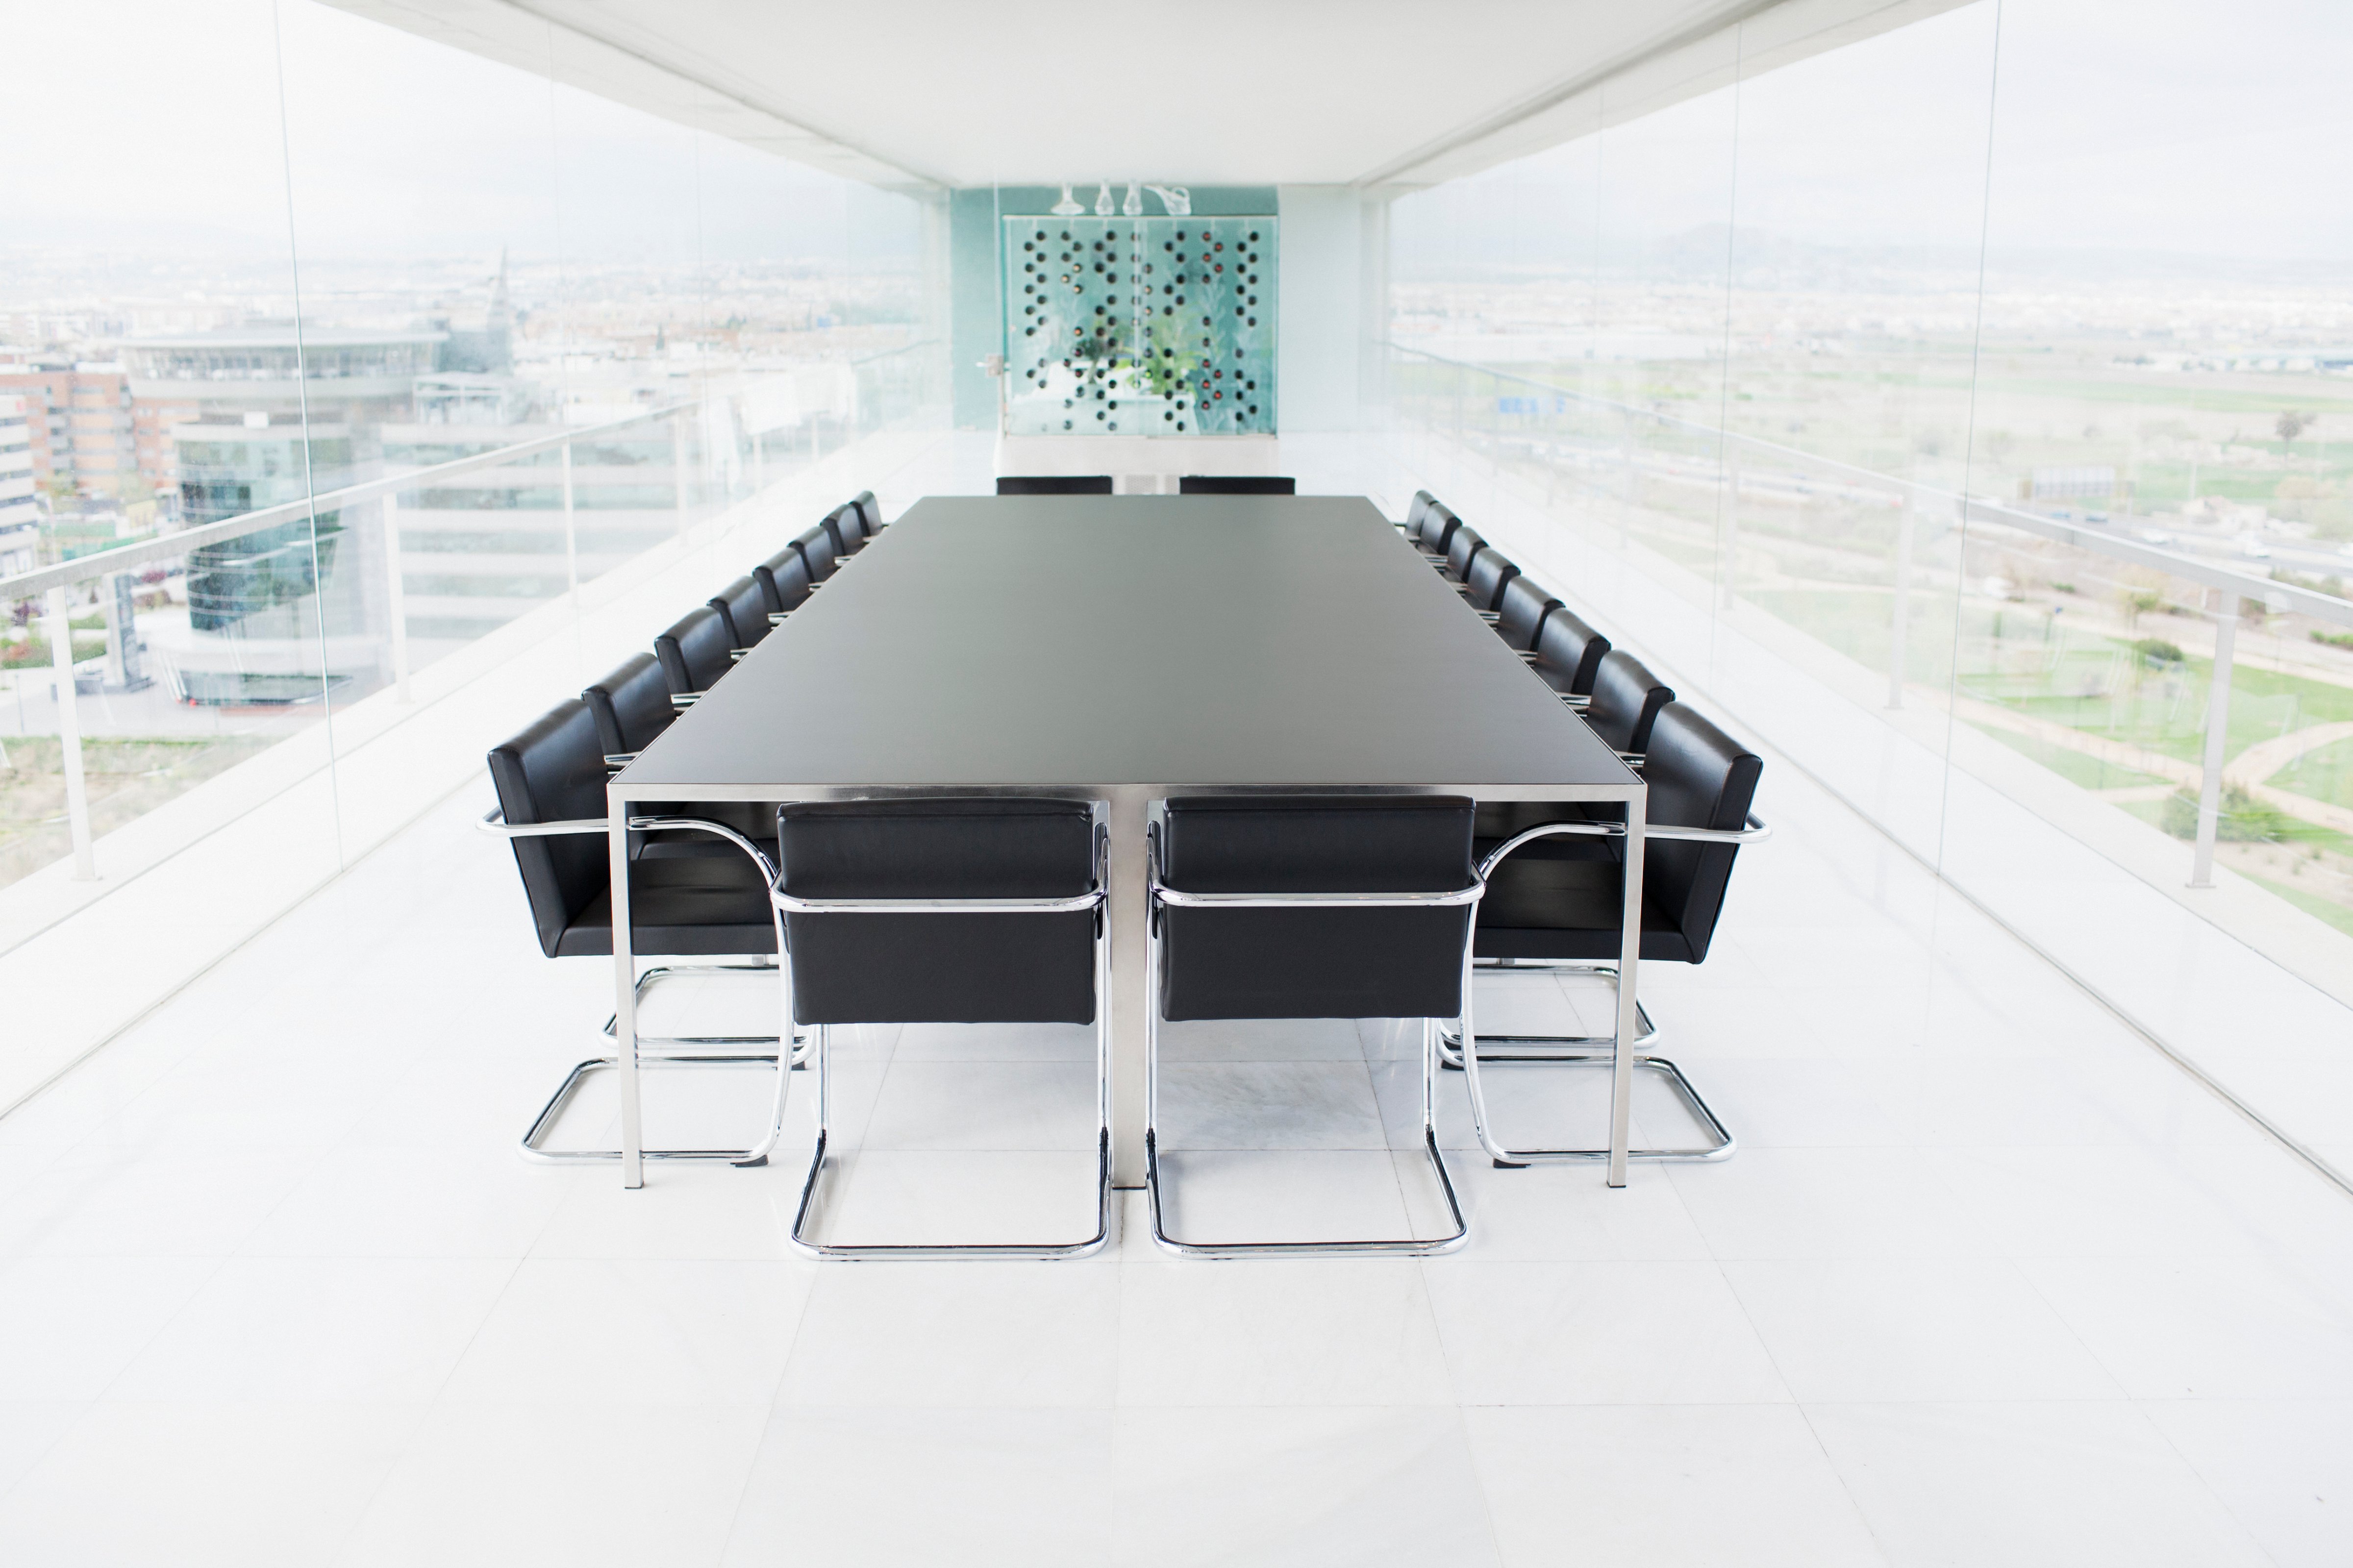 Empty conference room overlooking city (Martin Barraud—Getty Images/Caiaimage)